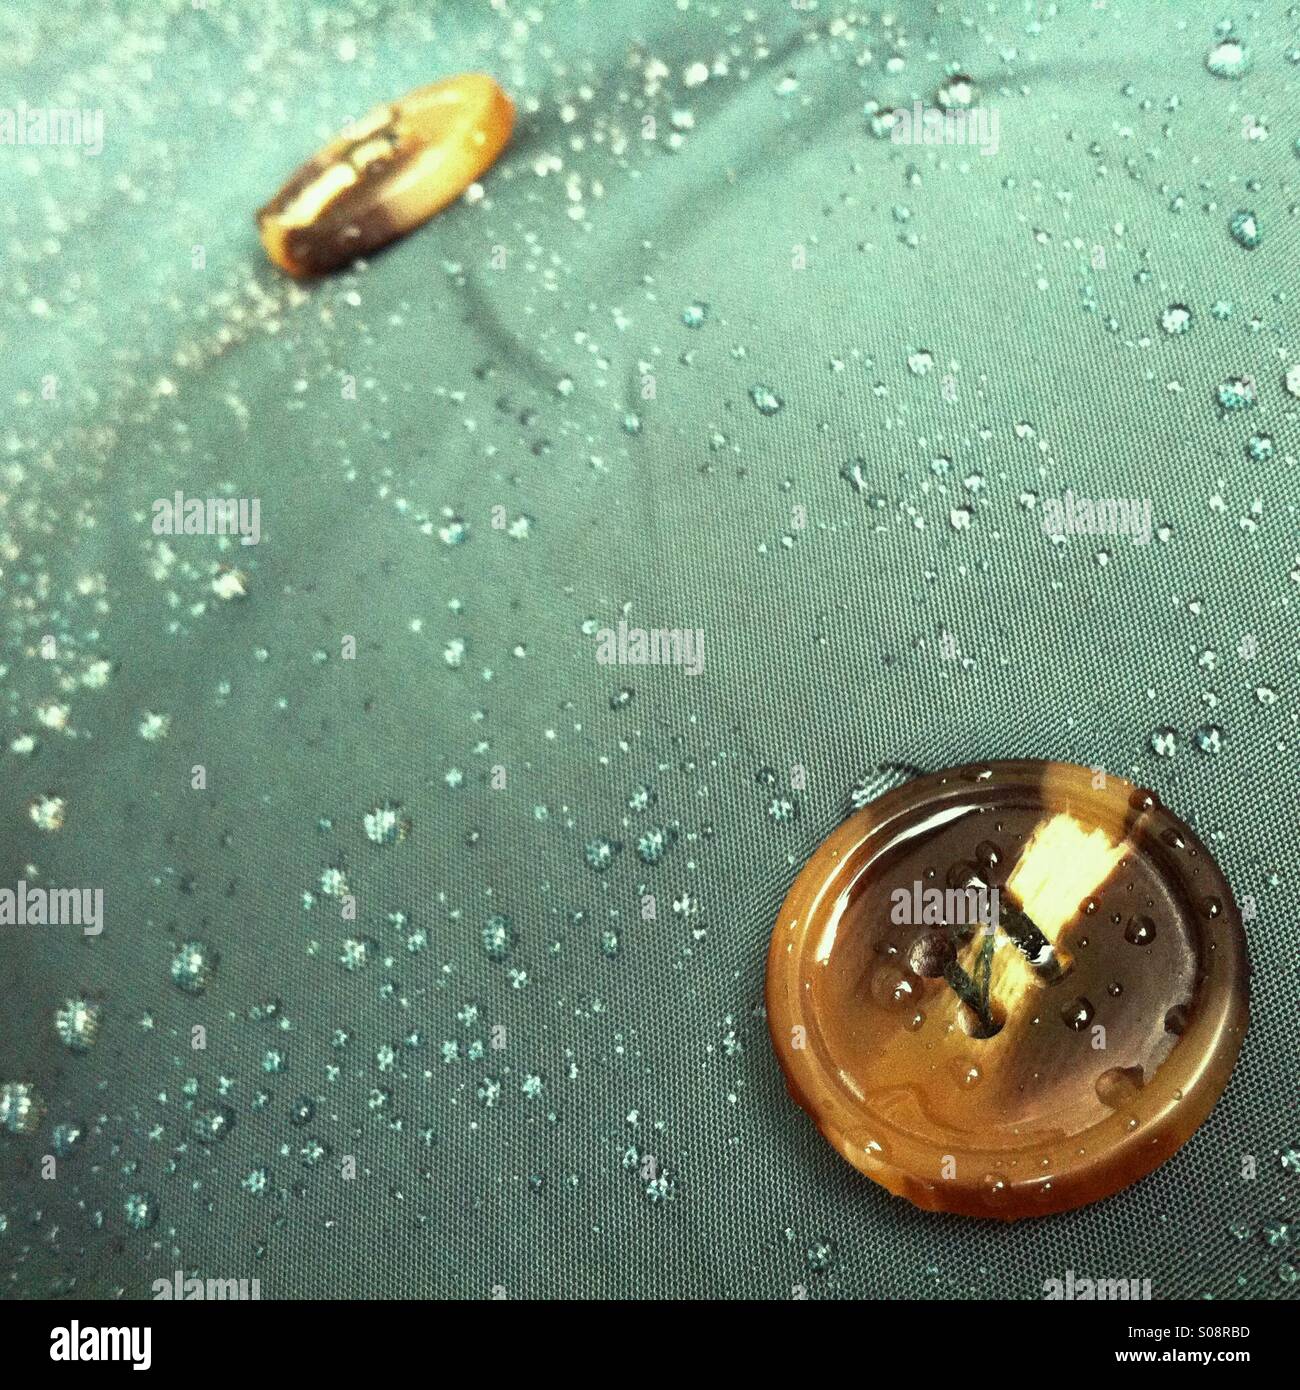 Closeup of water droplets and buttons on a dark green mackintosh Stock Photo